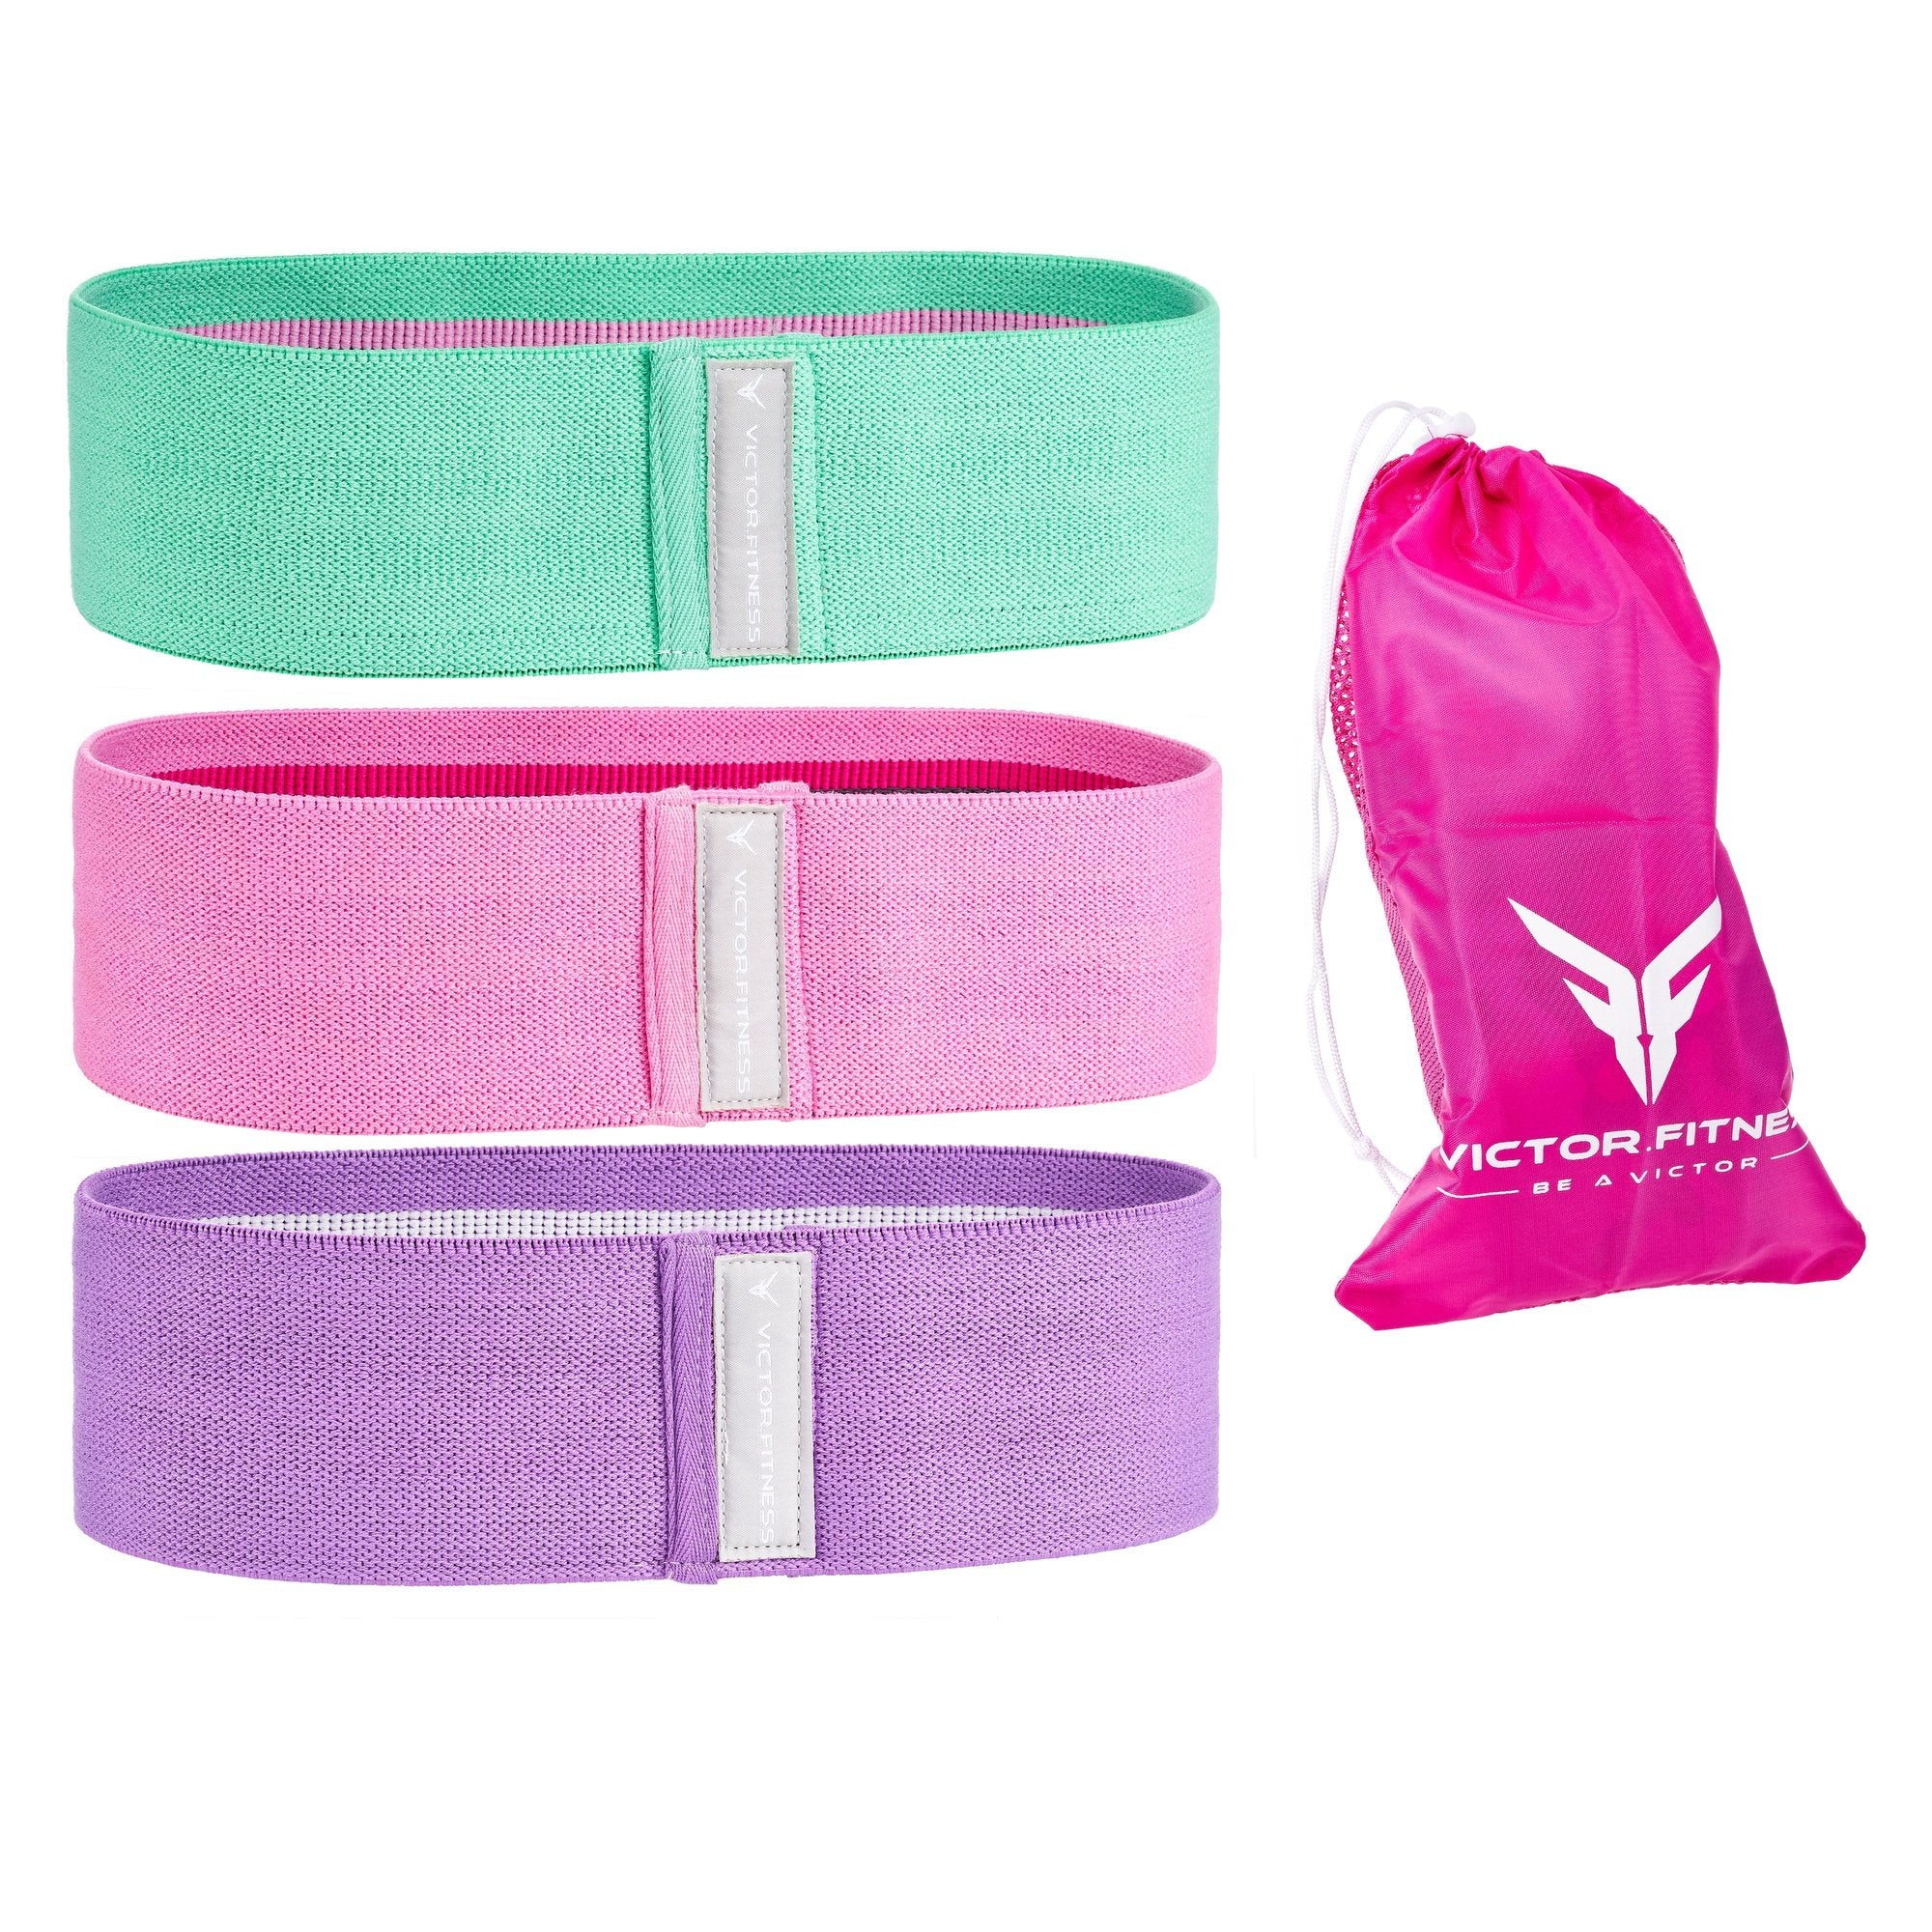 Recredo Booty Bands, 3 Resistance Bands for Legs and Butt, Non